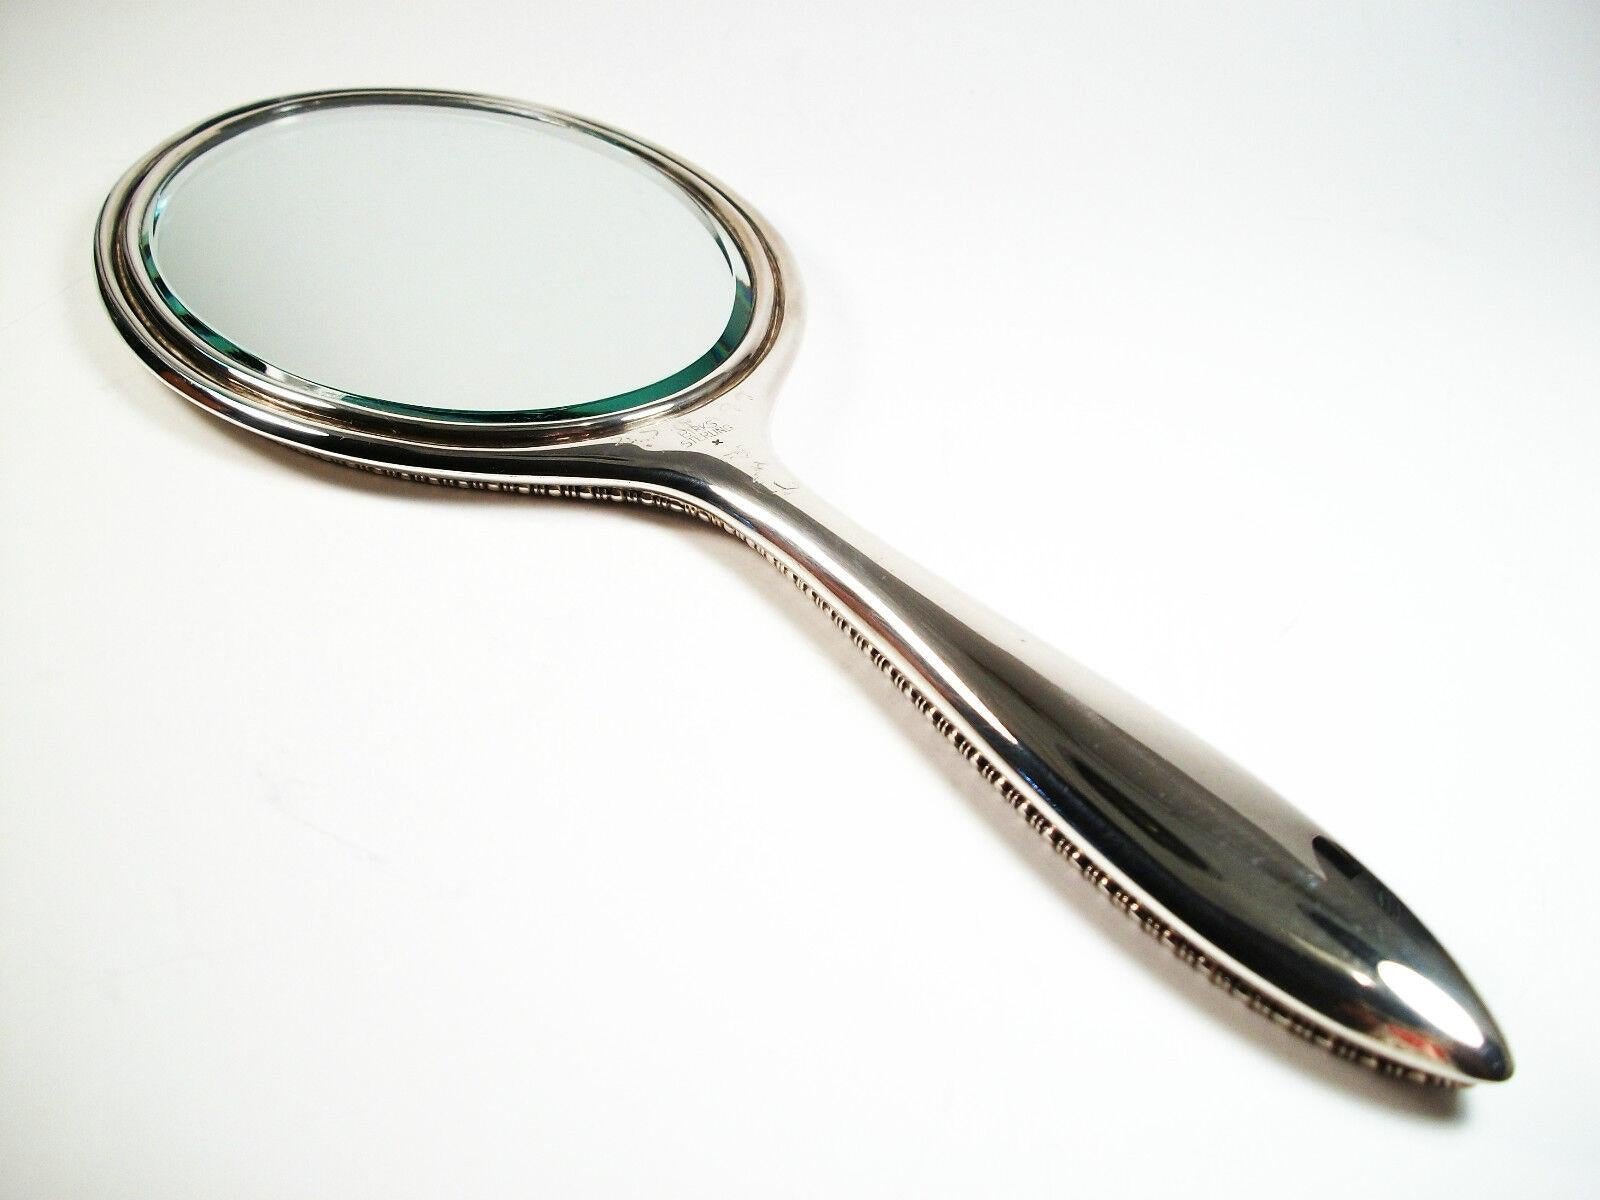 Canadian Birks, Vintage Sterling Silver Hand Mirror, D Monogram, Canada, 20th Century For Sale